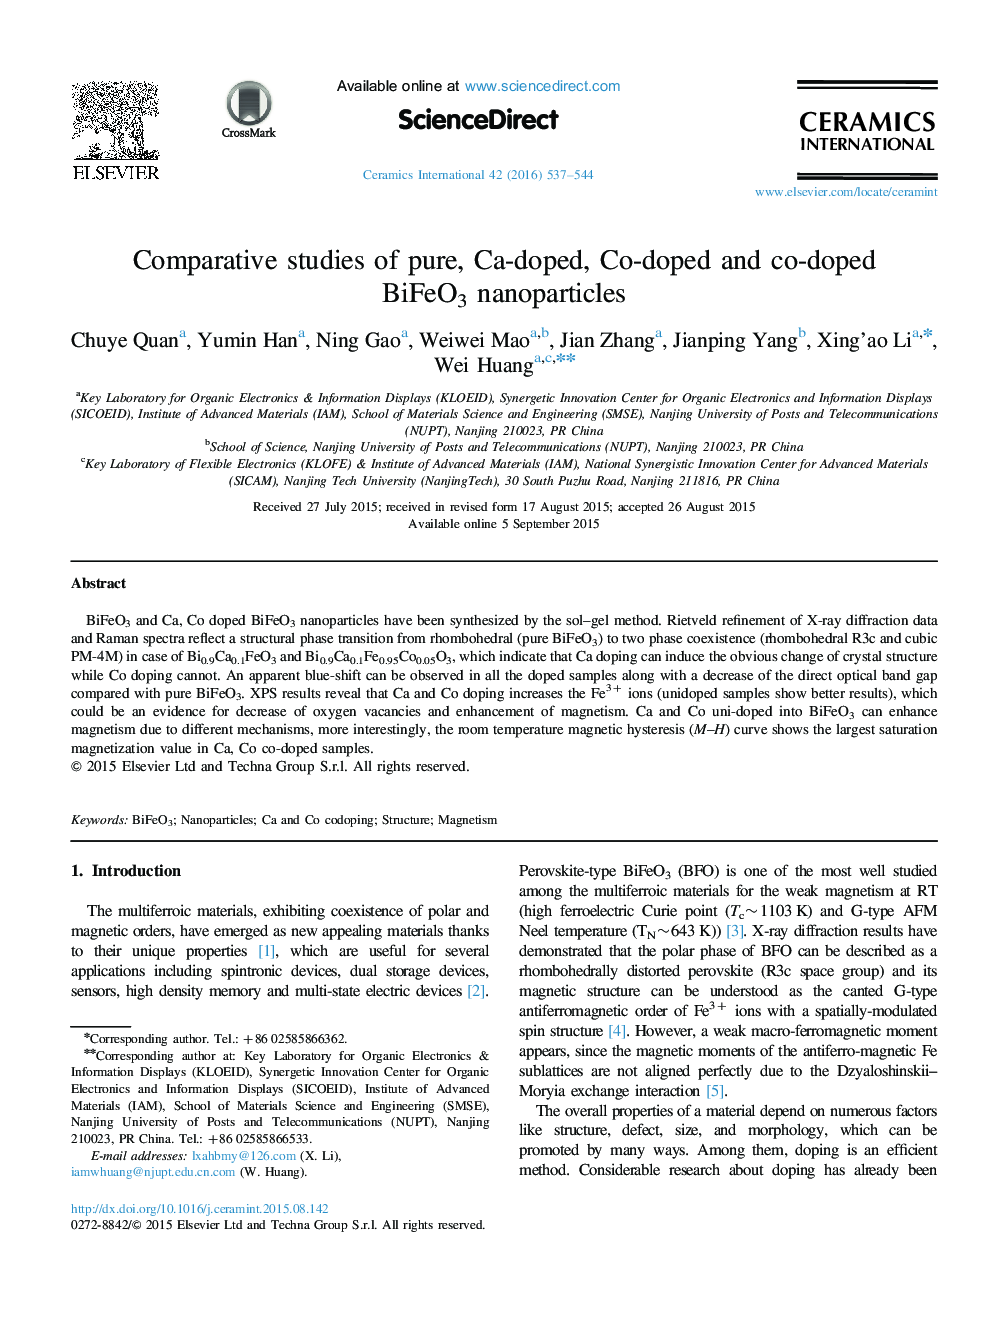 Comparative studies of pure, Ca-doped, Co-doped and co-doped BiFeO3 nanoparticles